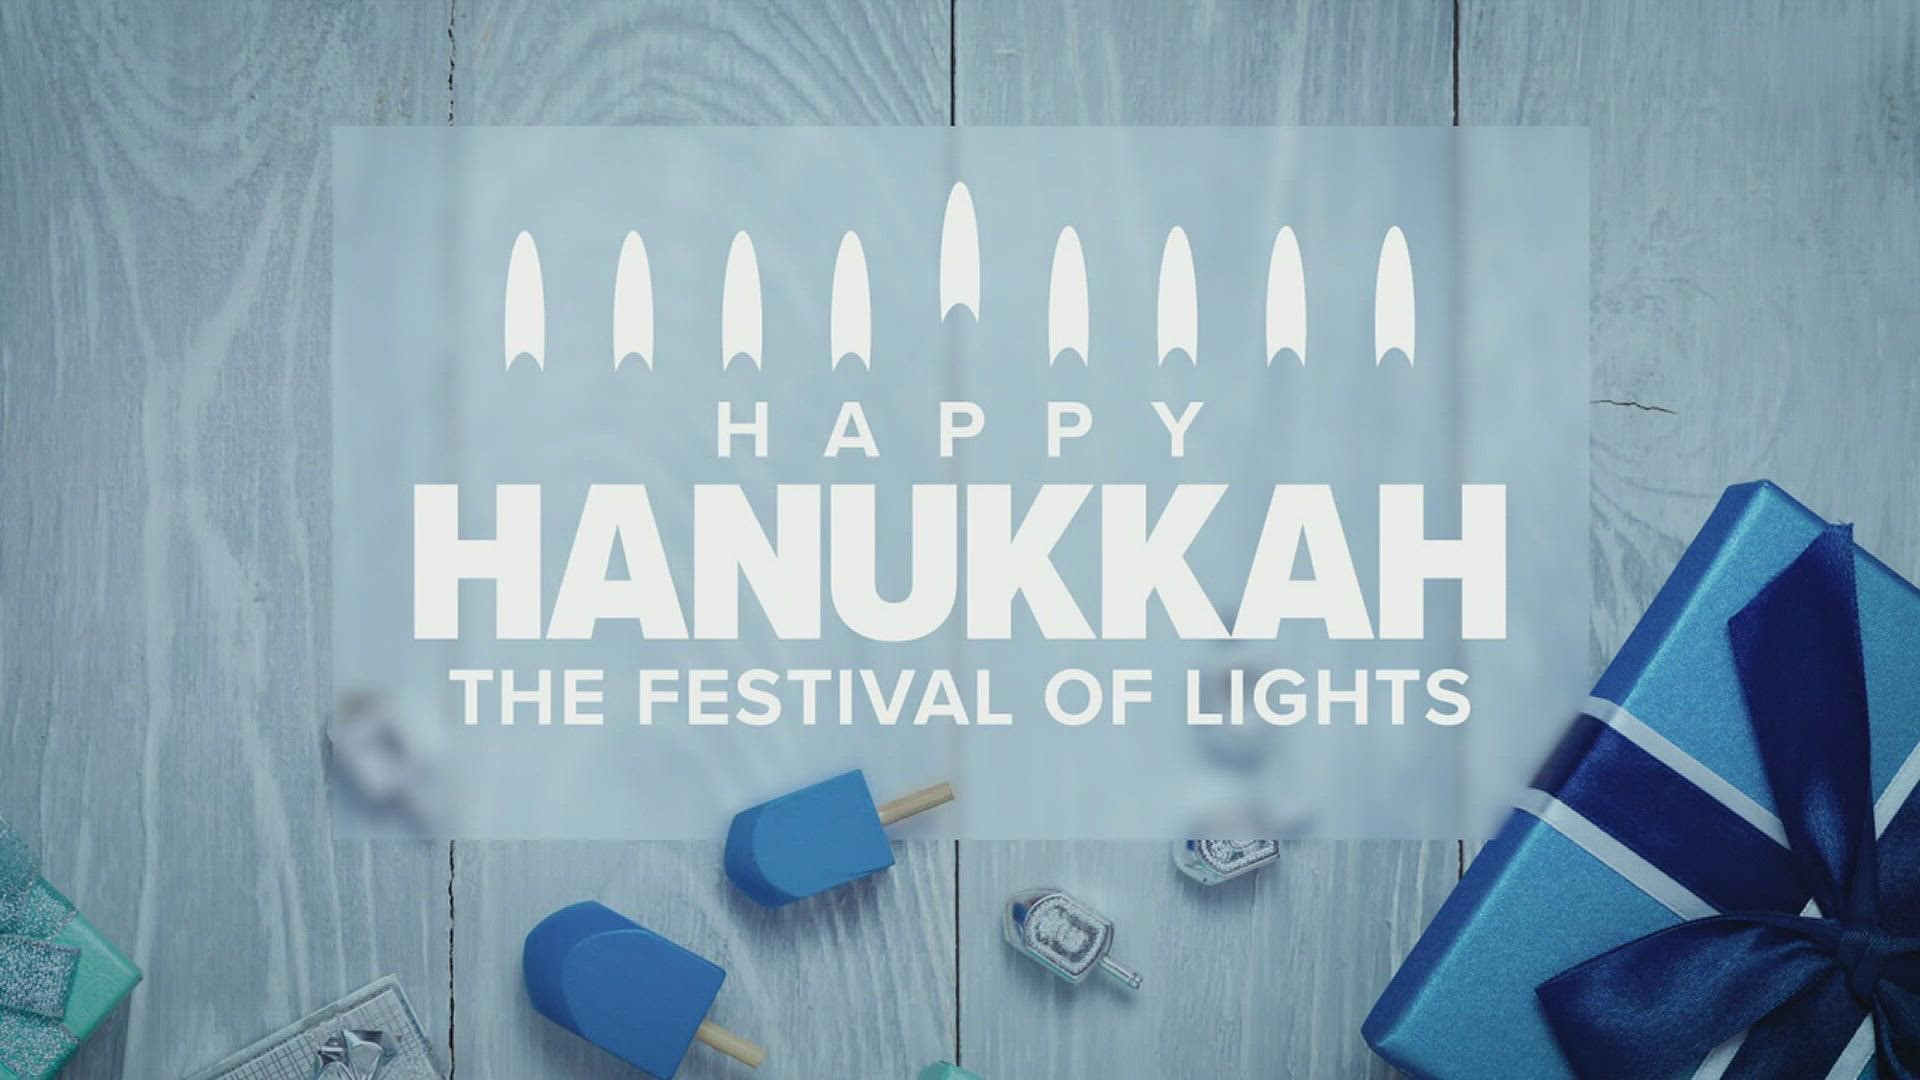 From Hanukkah traditions to keeping pets safe, we have you covered.